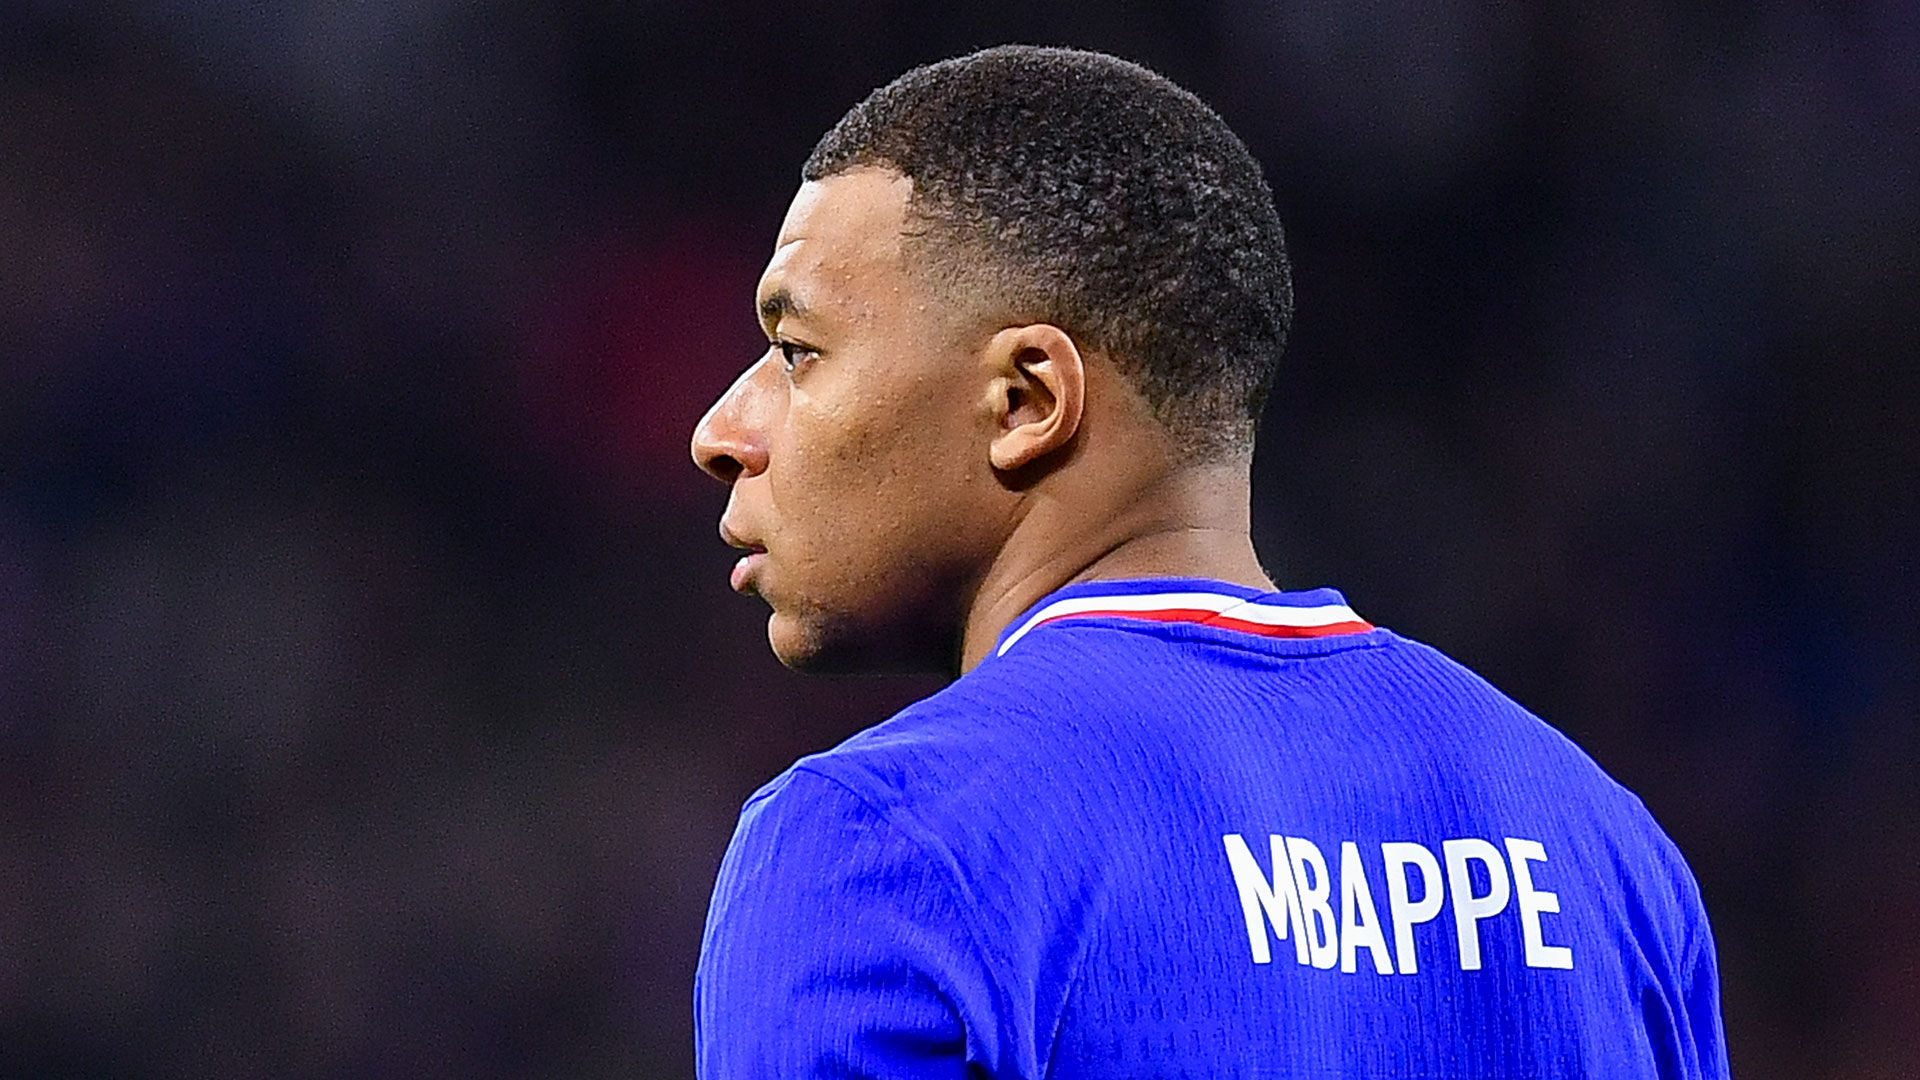 Mbappé signs for Real Madrid